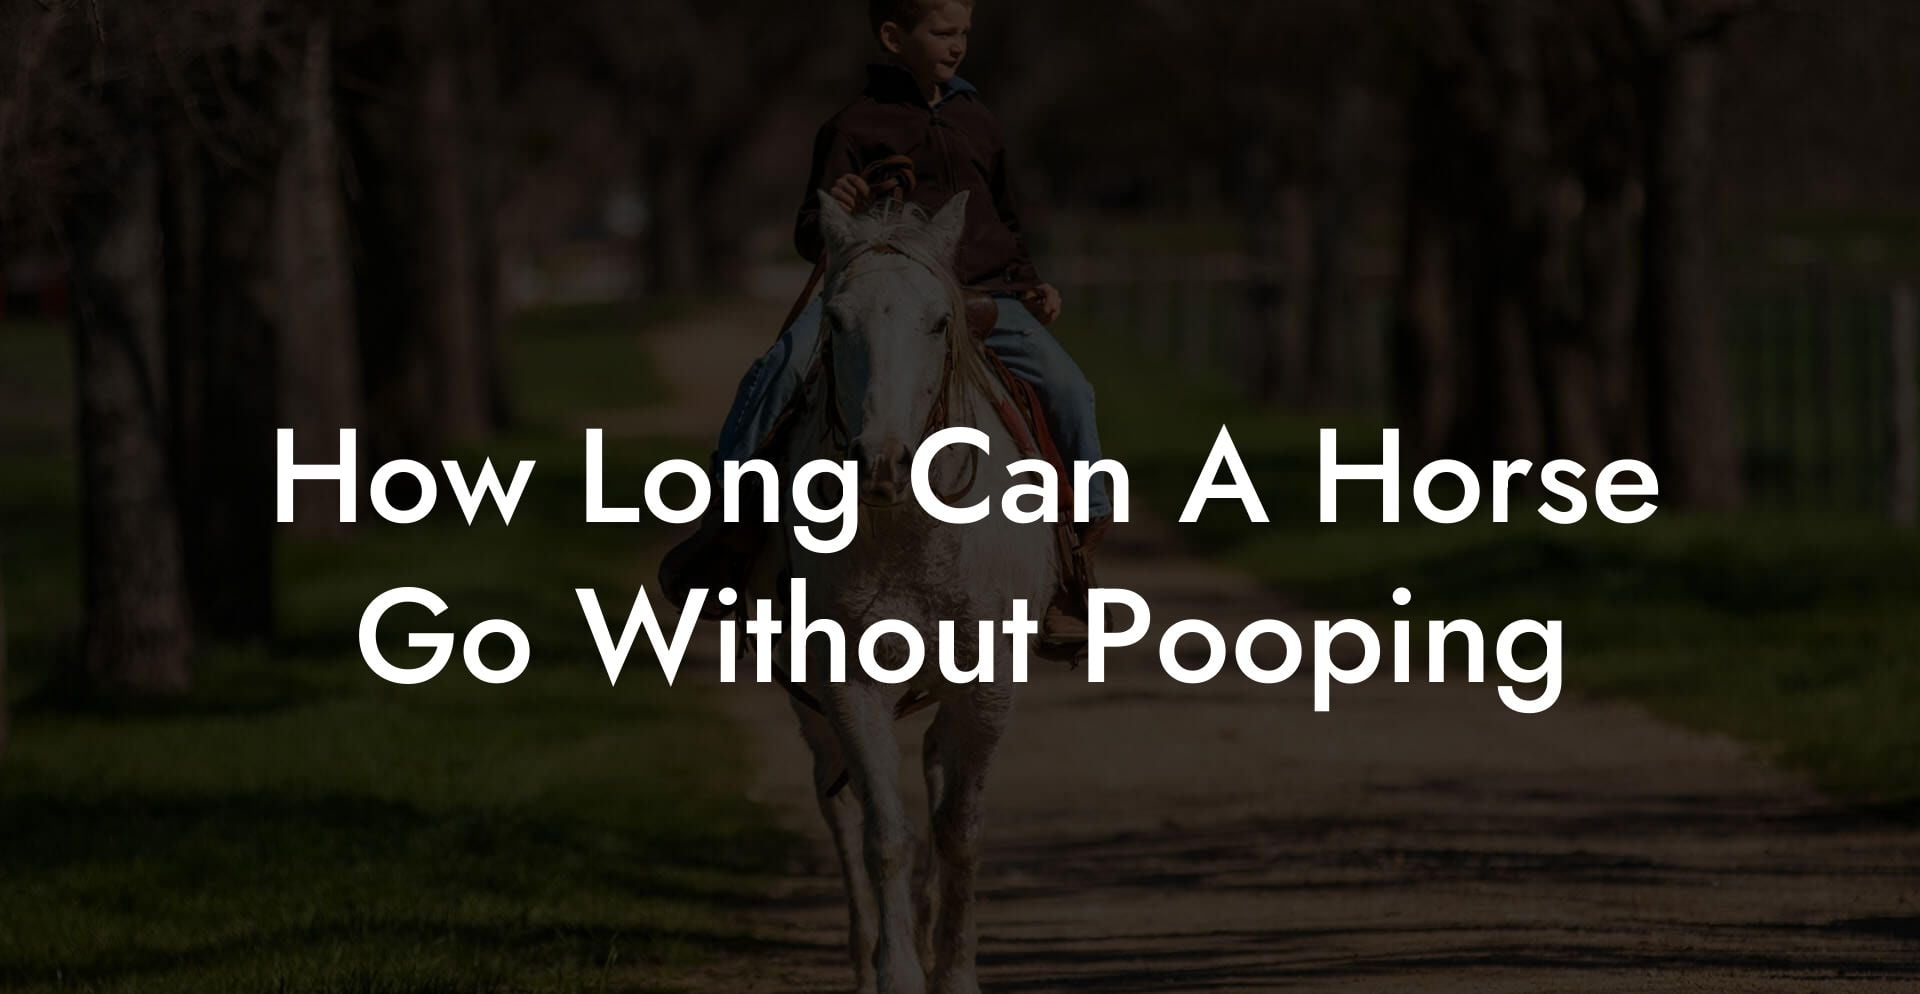 How Long Can A Horse Go Without Pooping